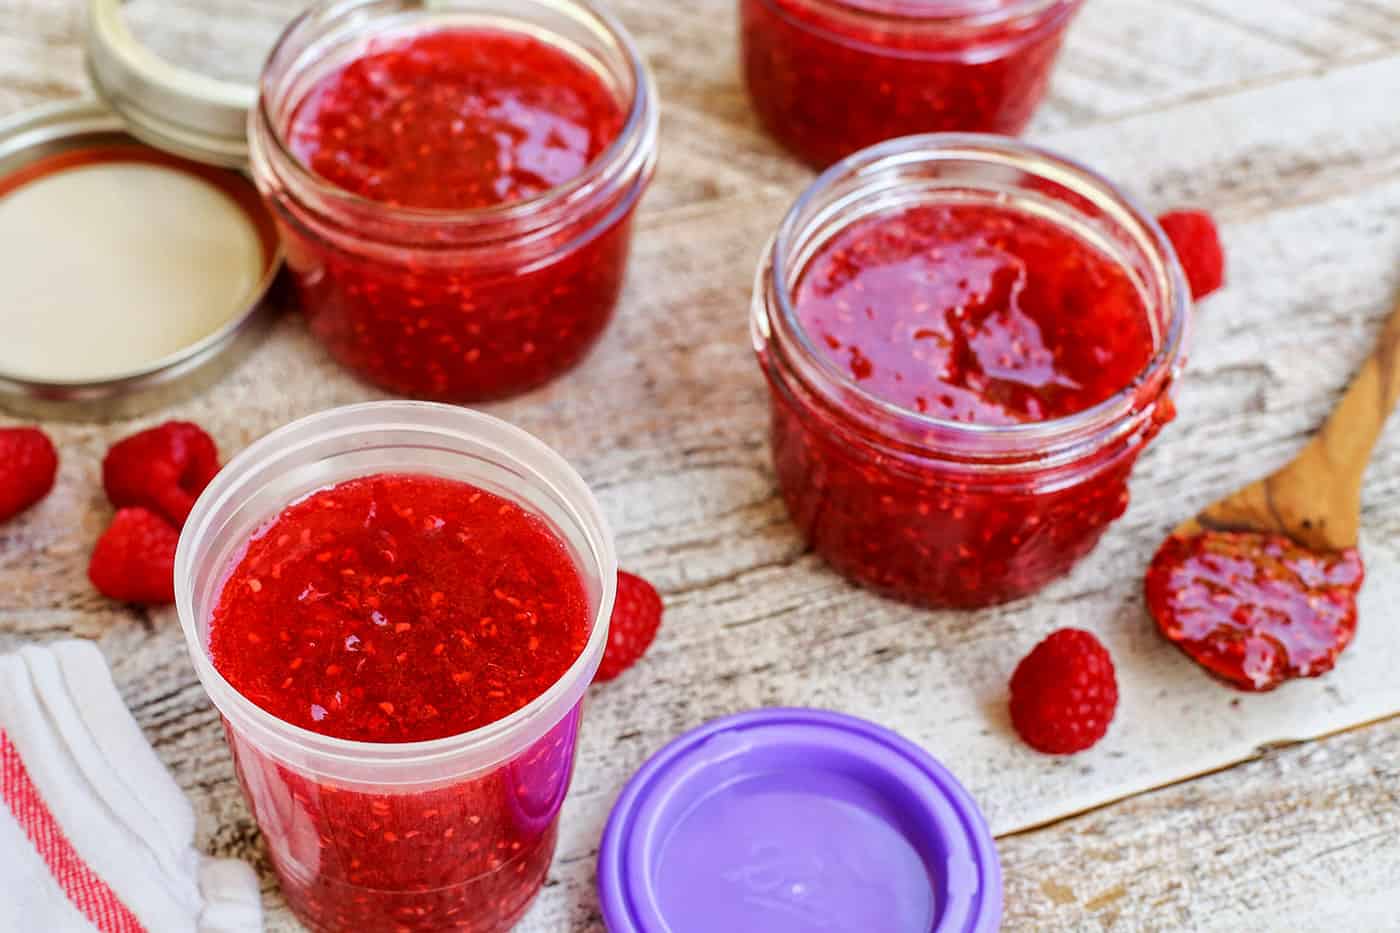 Containers filled with strawberry freezer jam